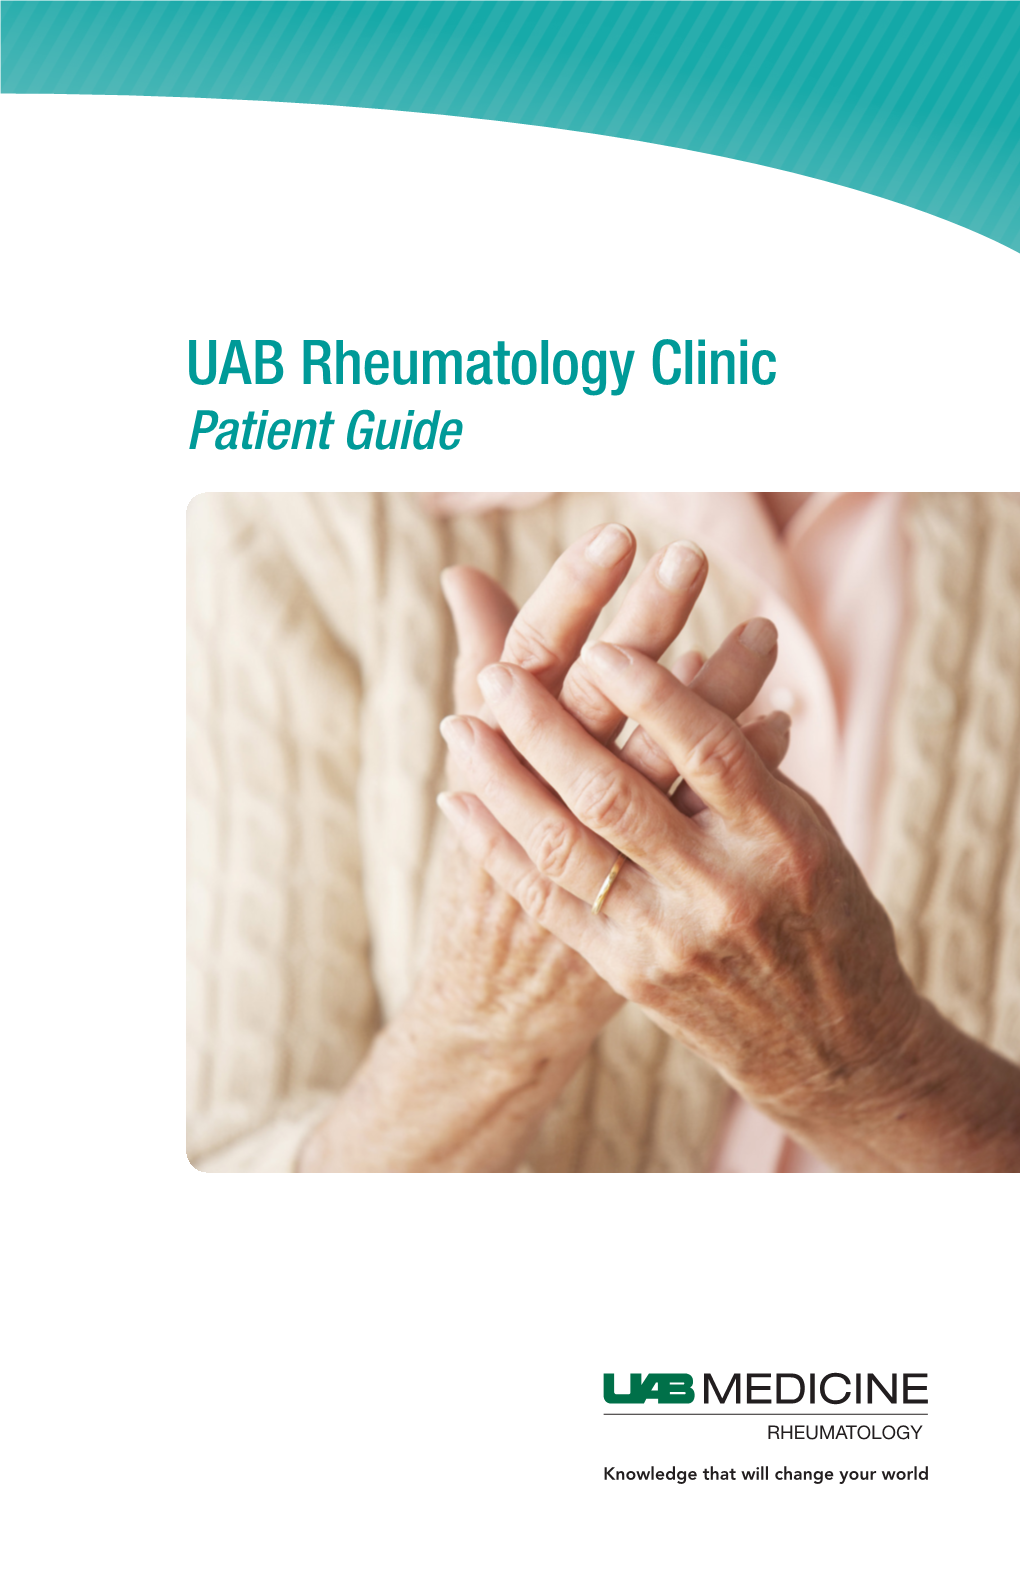 UAB Rheumatology Clinic Patient Guide Welcome to the UAB Rheumatology Clinic